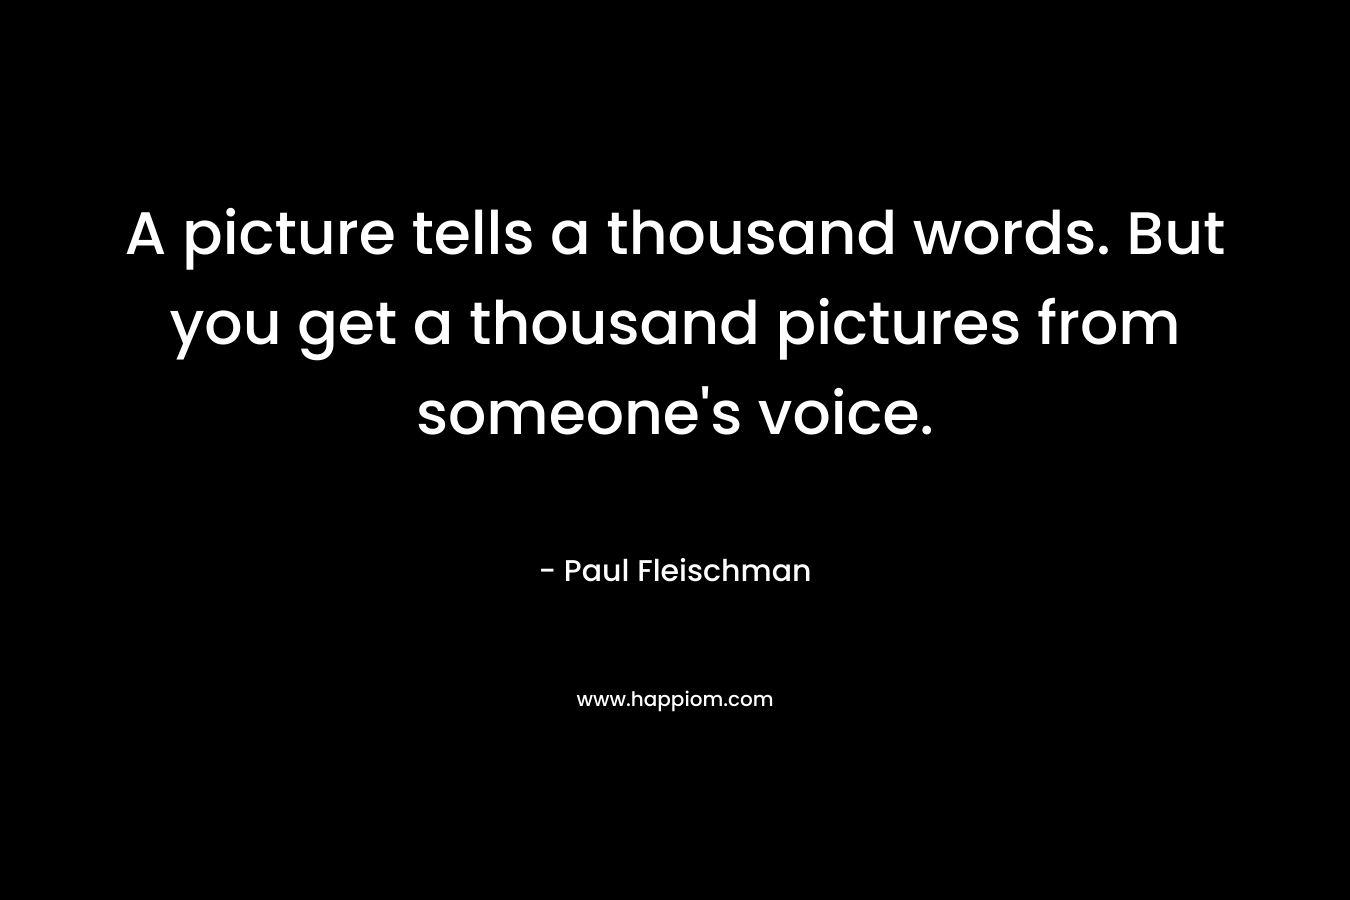 A picture tells a thousand words. But you get a thousand pictures from someone's voice.